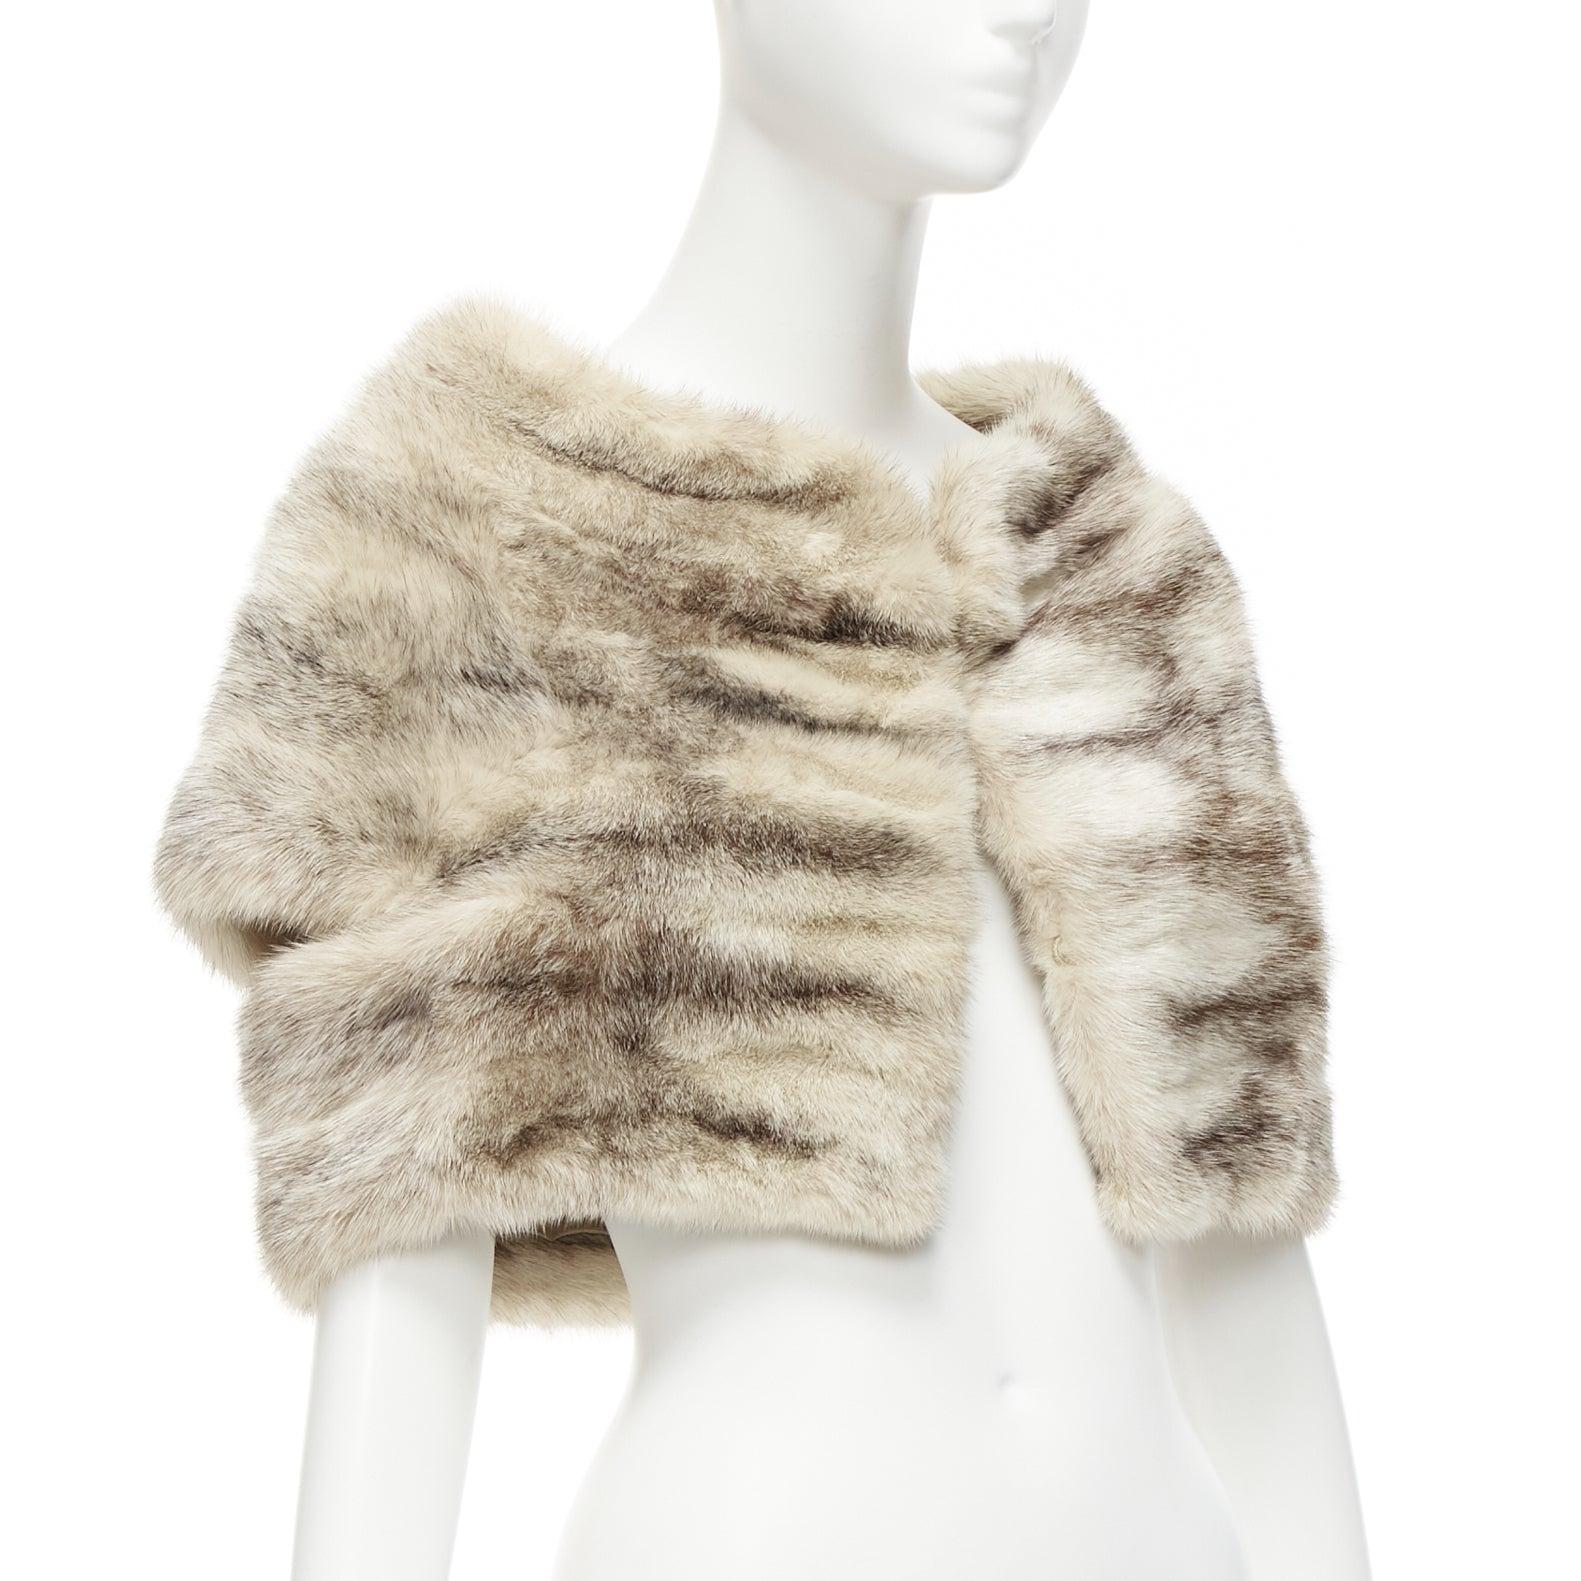 MARNI beige genuine fur striped colouring shawl bolero crop jacket IT40
Reference: DYTG/A00005
Brand: Marni
Material: Fur
Color: Beige, Brown
Pattern: Solid
Closure: Hook & Bar
Lining: Beige Silk
Extra Details: Silk lined.
Made in: